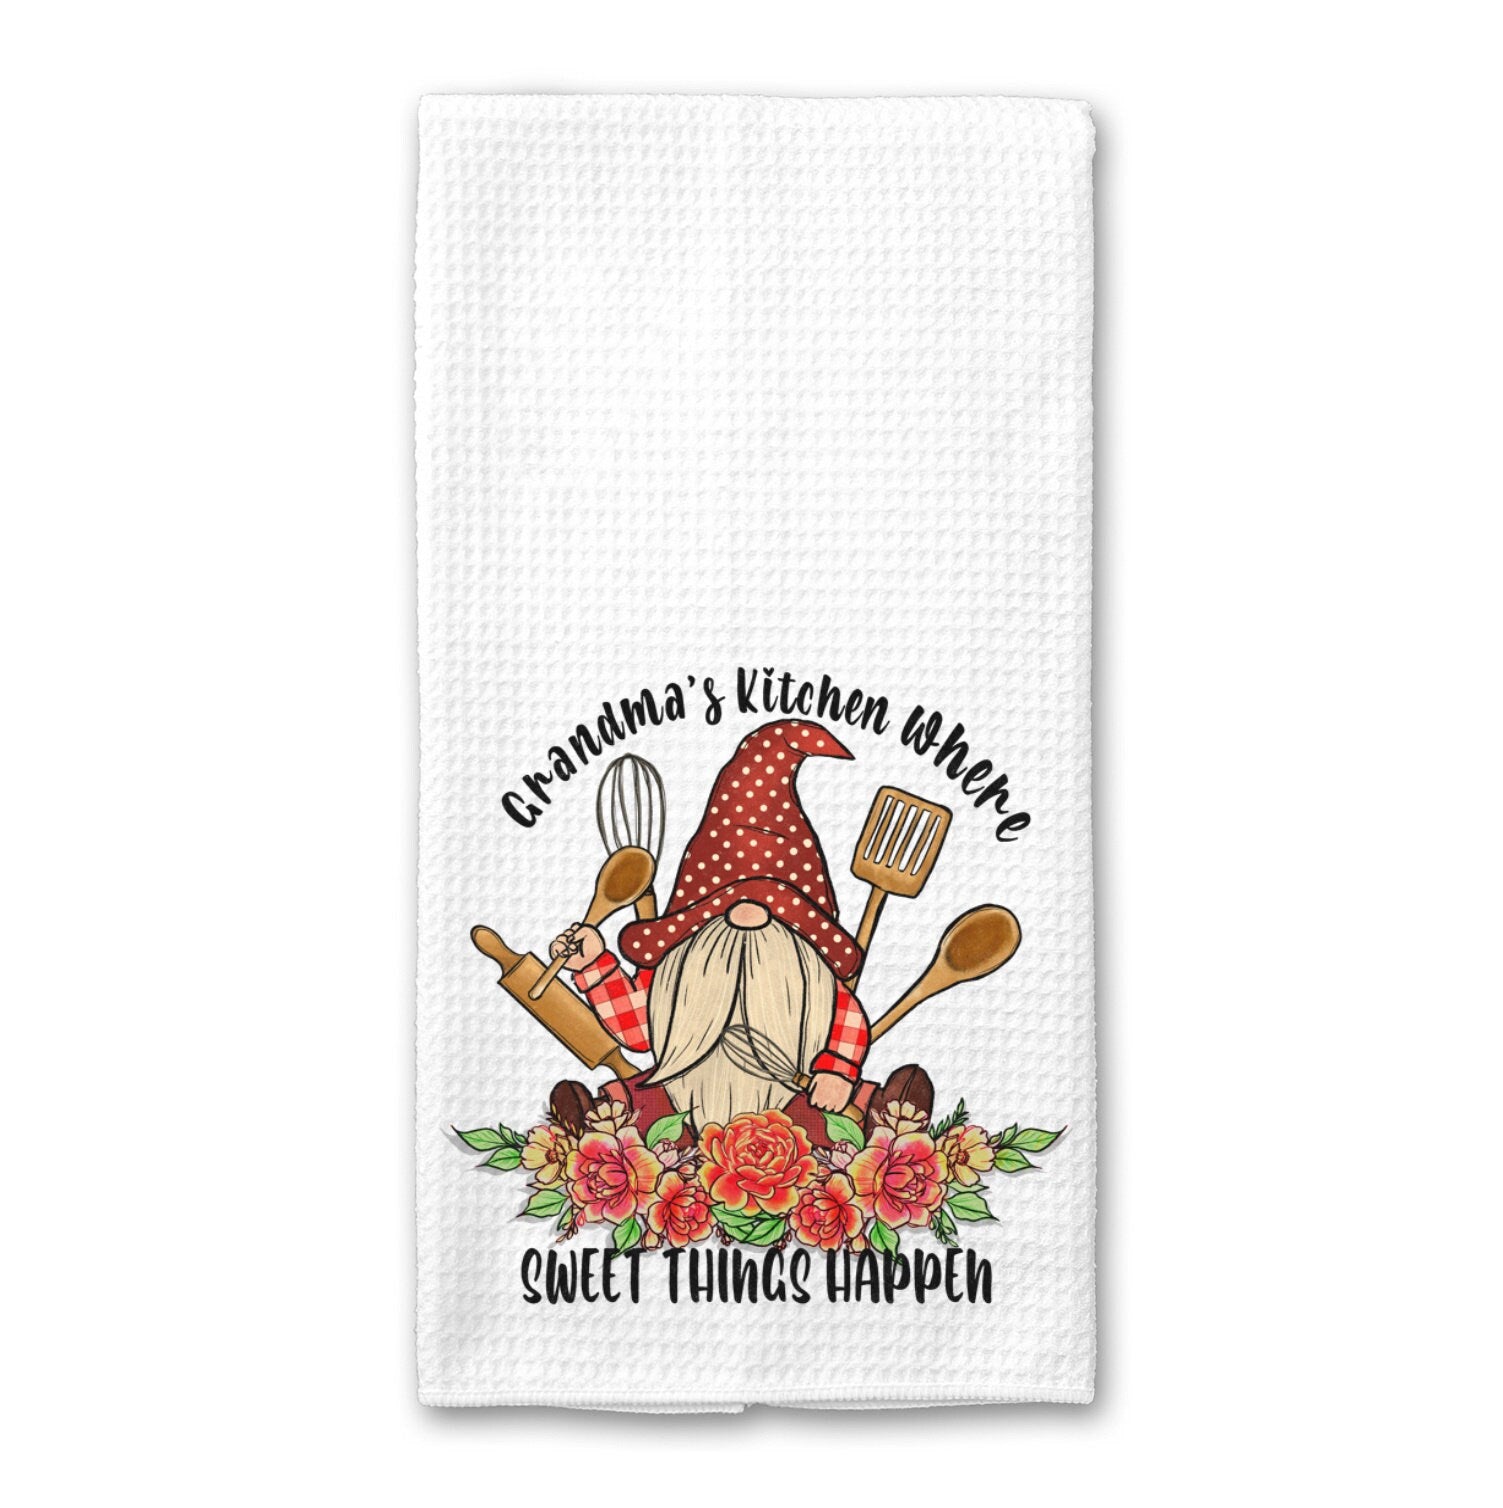 Grandma's Kitchen Gnome Sweet Things Dish Towel - Mother's Day Tea Towel Kitchen Decor - New Home Gift Farm Decorations house Towel